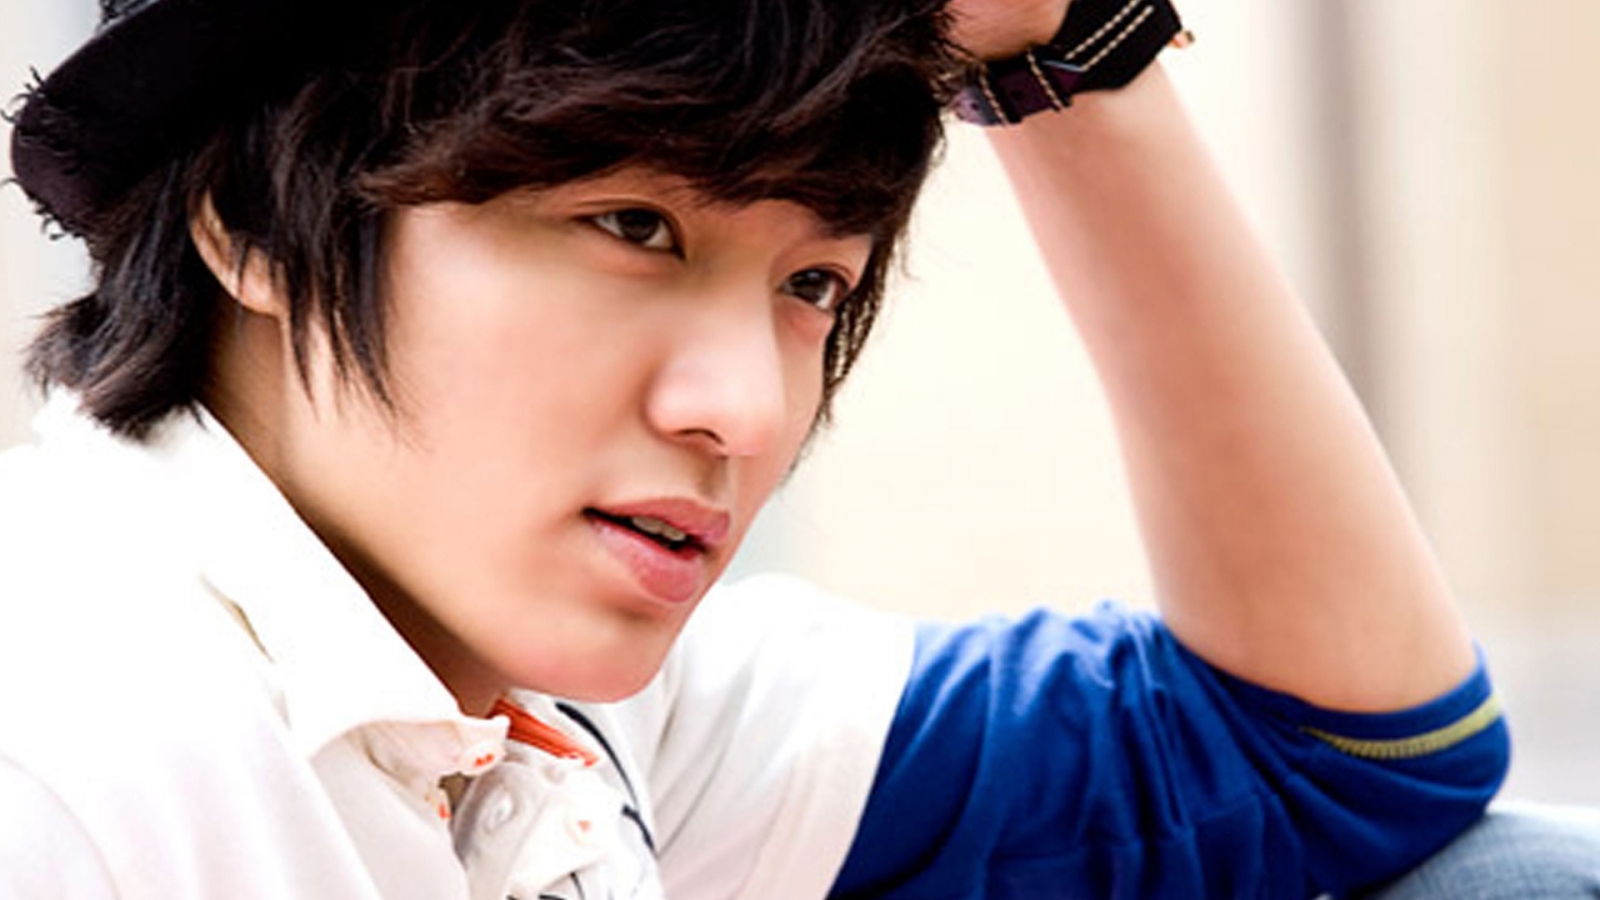 Lee Min Ho Profile Look for 1600 x 900 HDTV resolution